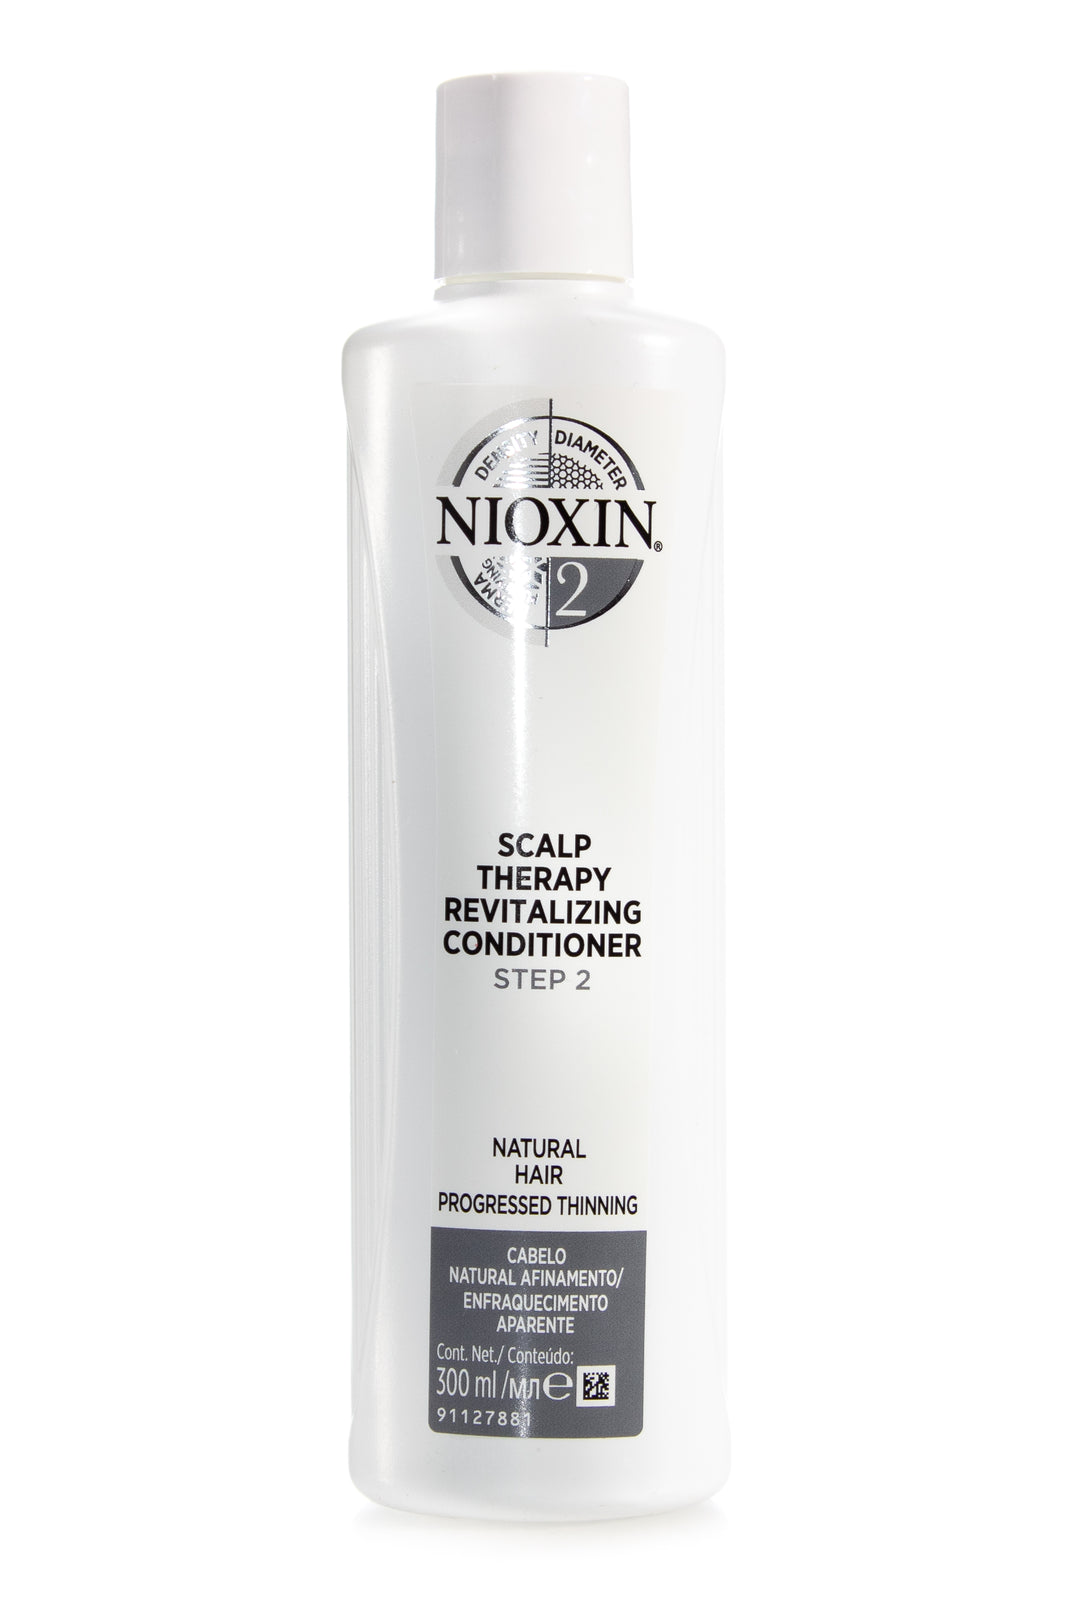 nioxin-system-2-scalp-therapy-revitalizing-conditioner-300ml